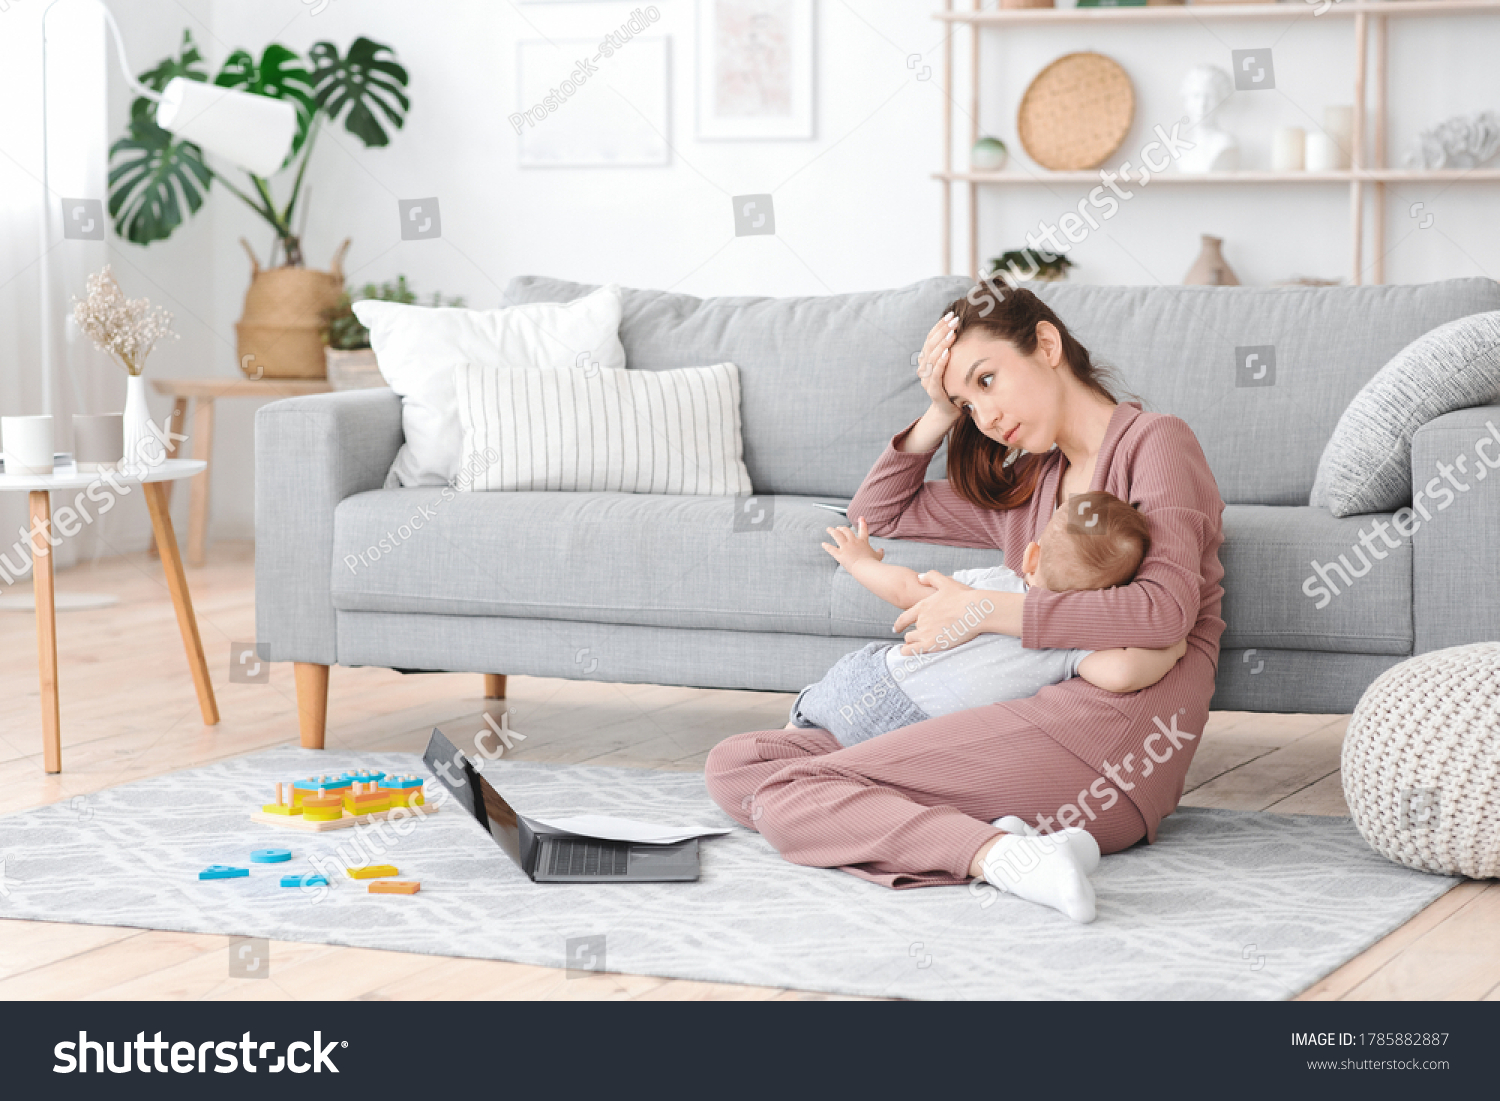 Motherhood Exhaustion Concept. Tired young mom breastfeeding baby and working on laptop at home, feeling frustrated, free space #1785882887